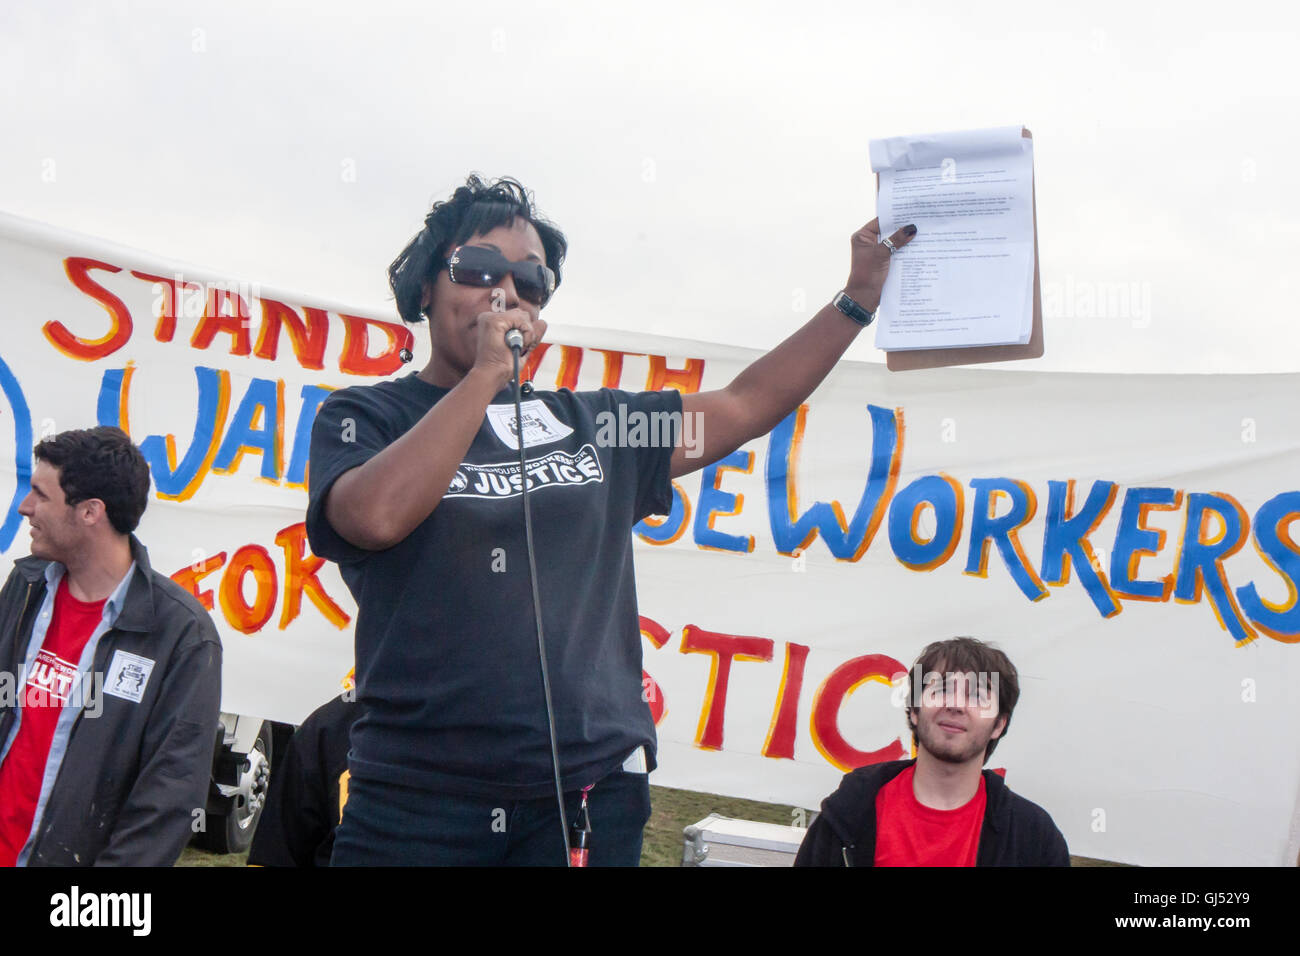 Elwood, Illinois - Oct. 1, 2012: Striking workers and supporters from the Walmart distribution center rally for better wages and working conditions. Stock Photo